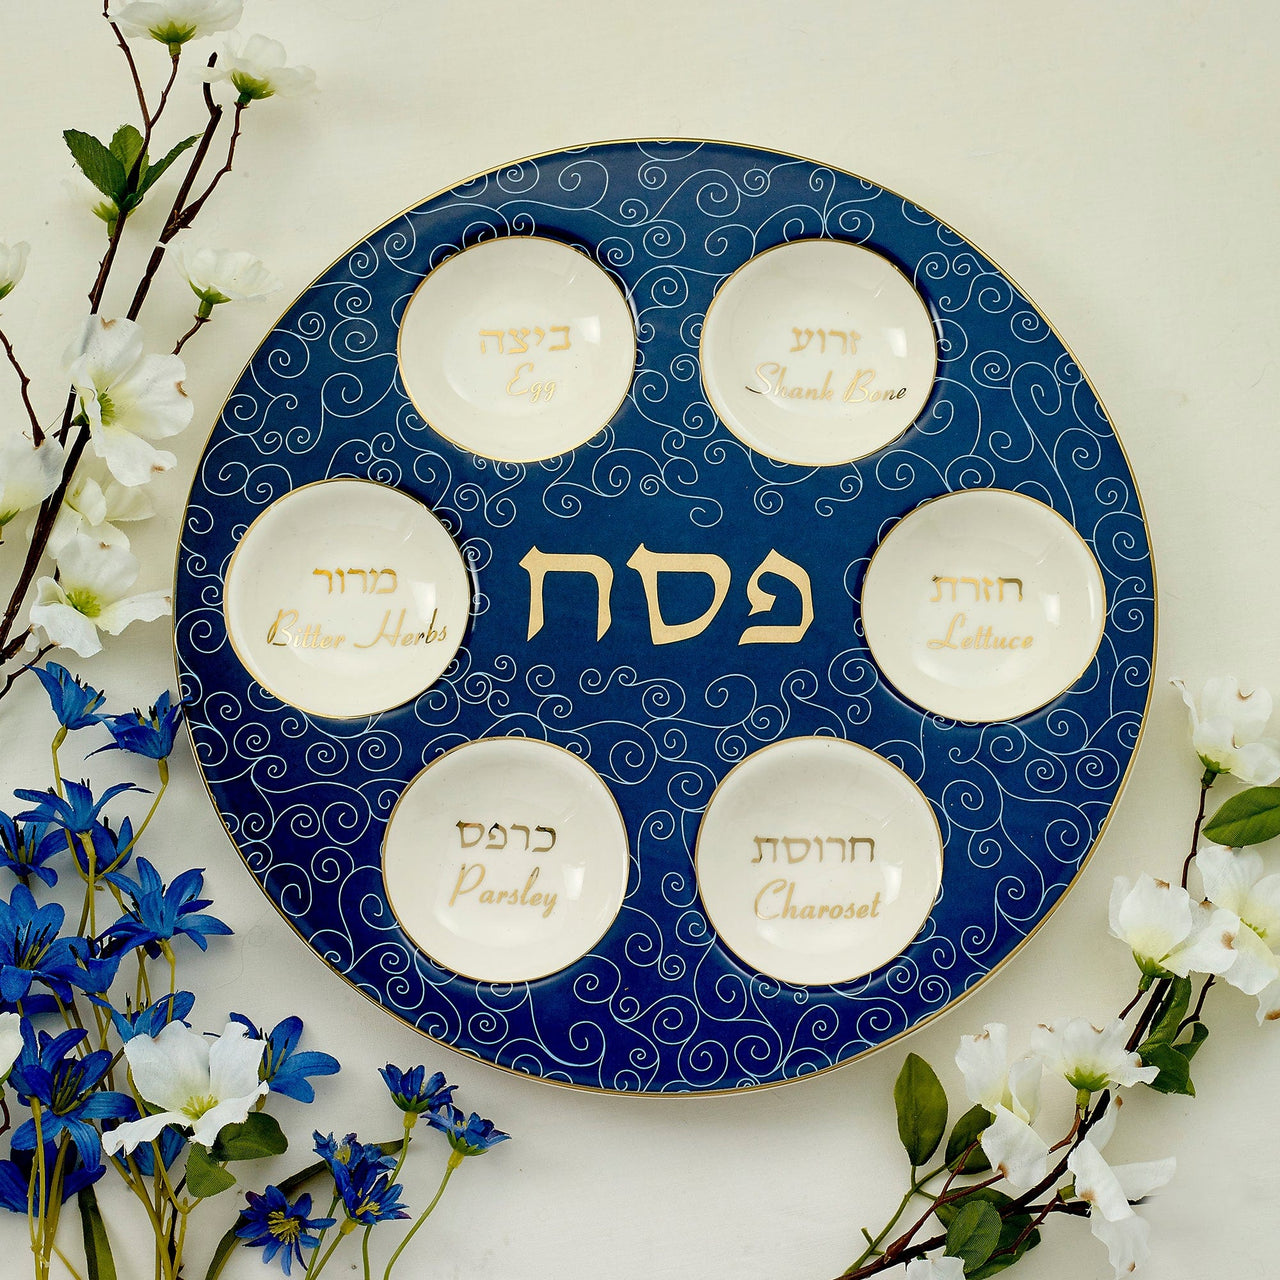 Rite Lite Seder Plates Classic Ceramic Seder Plate With Gold Accents